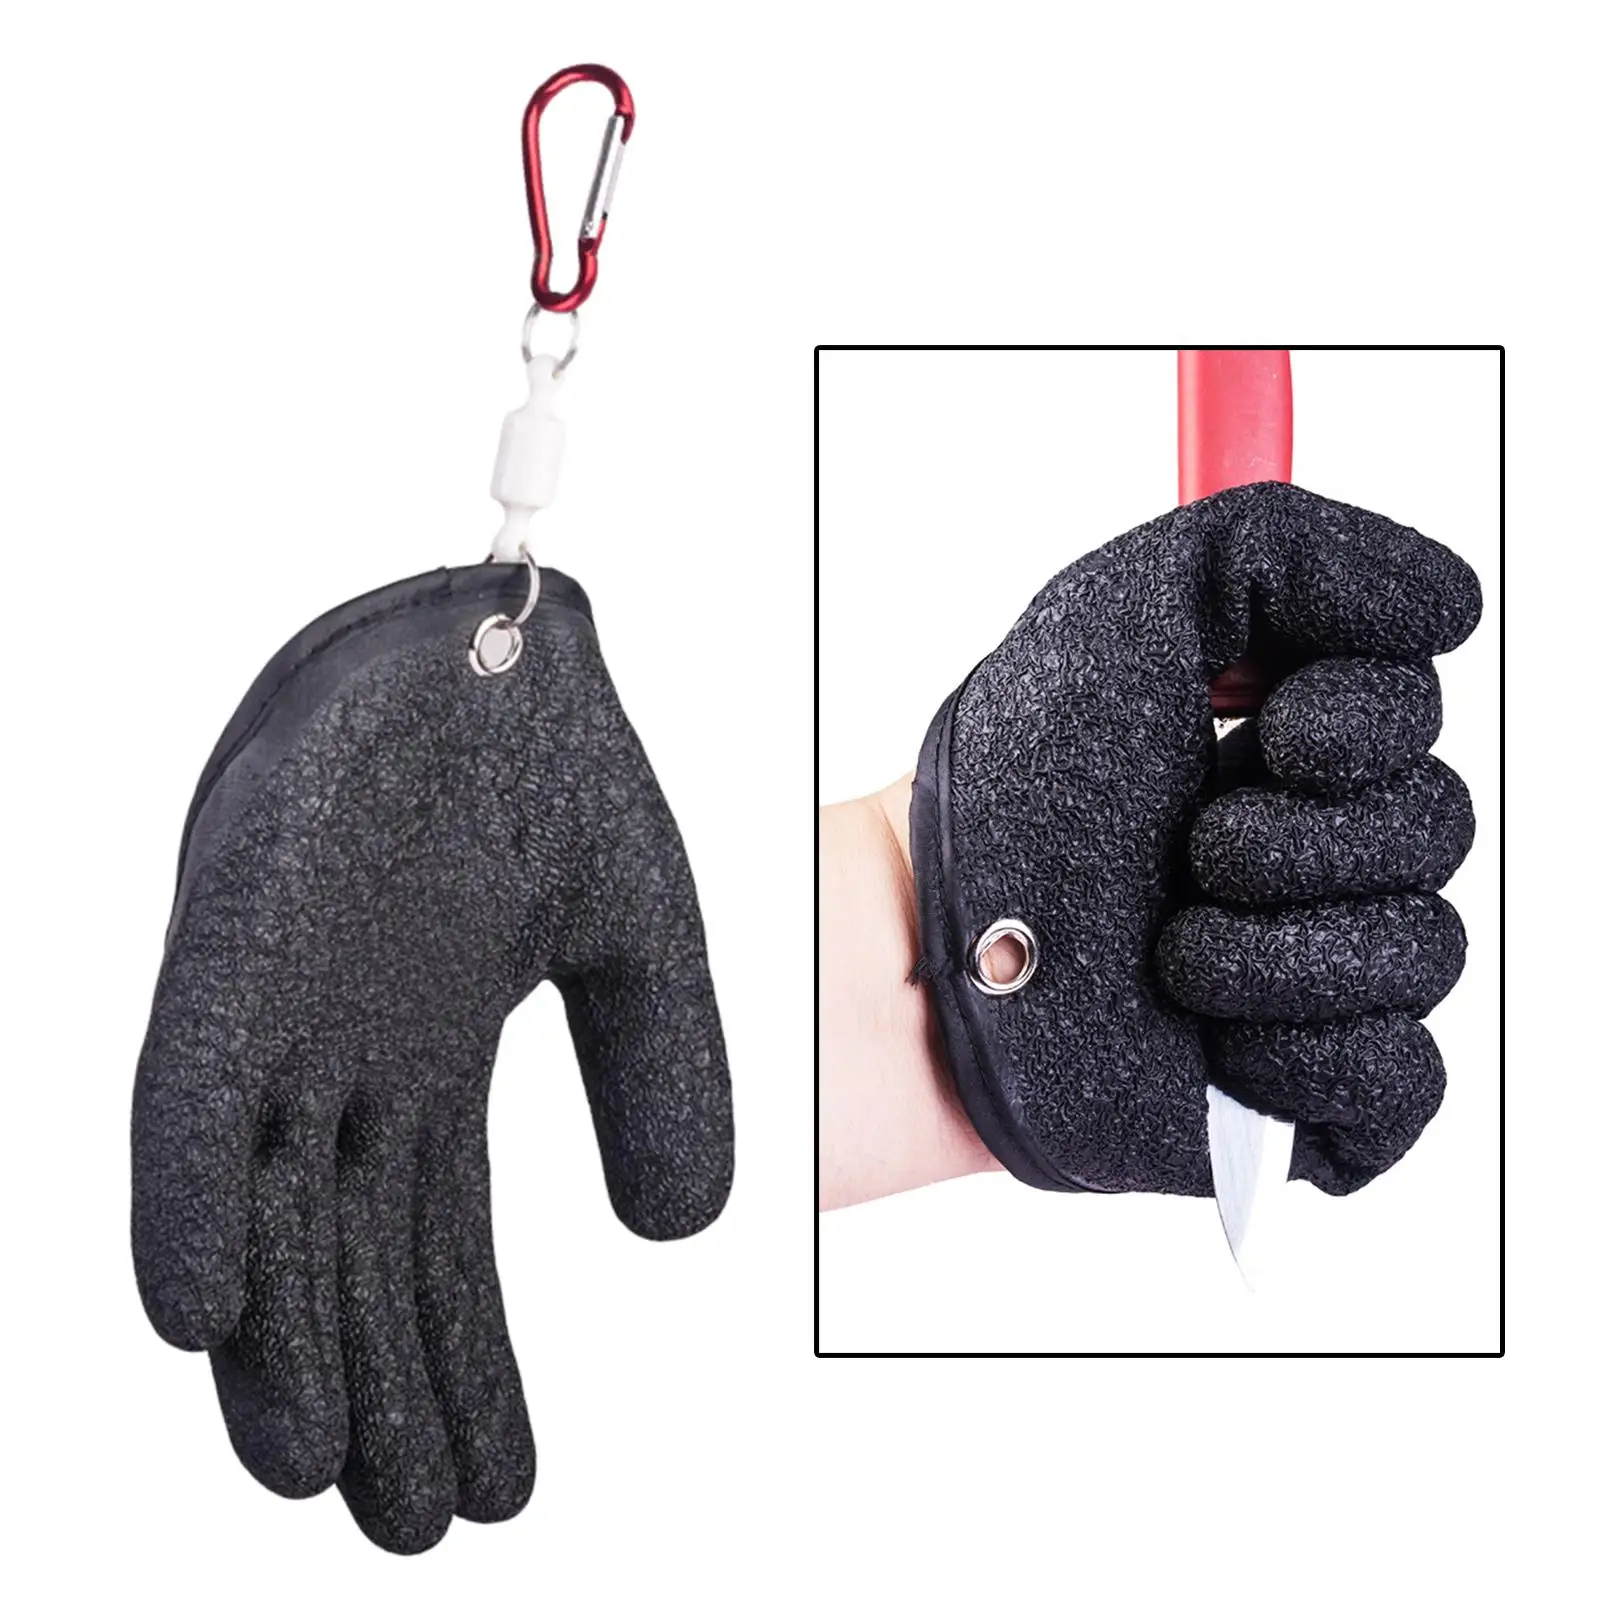 Fishing Catching Hunting Gloves Resistant Professional Fish Glove